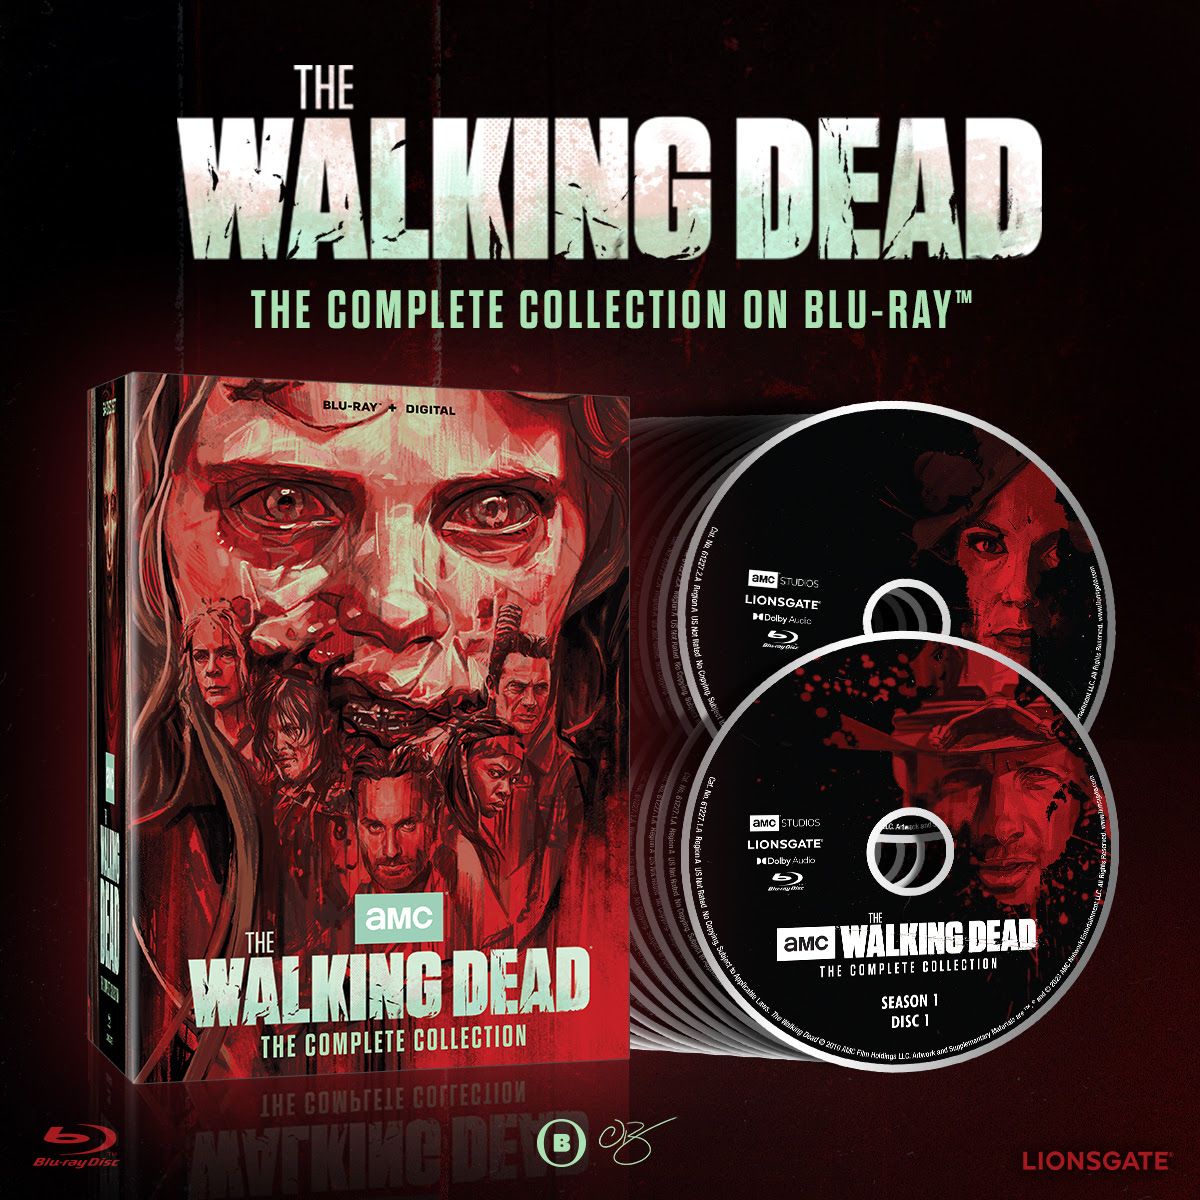 The Walking Dead Complete Collection Announced, Contains 54 Discs